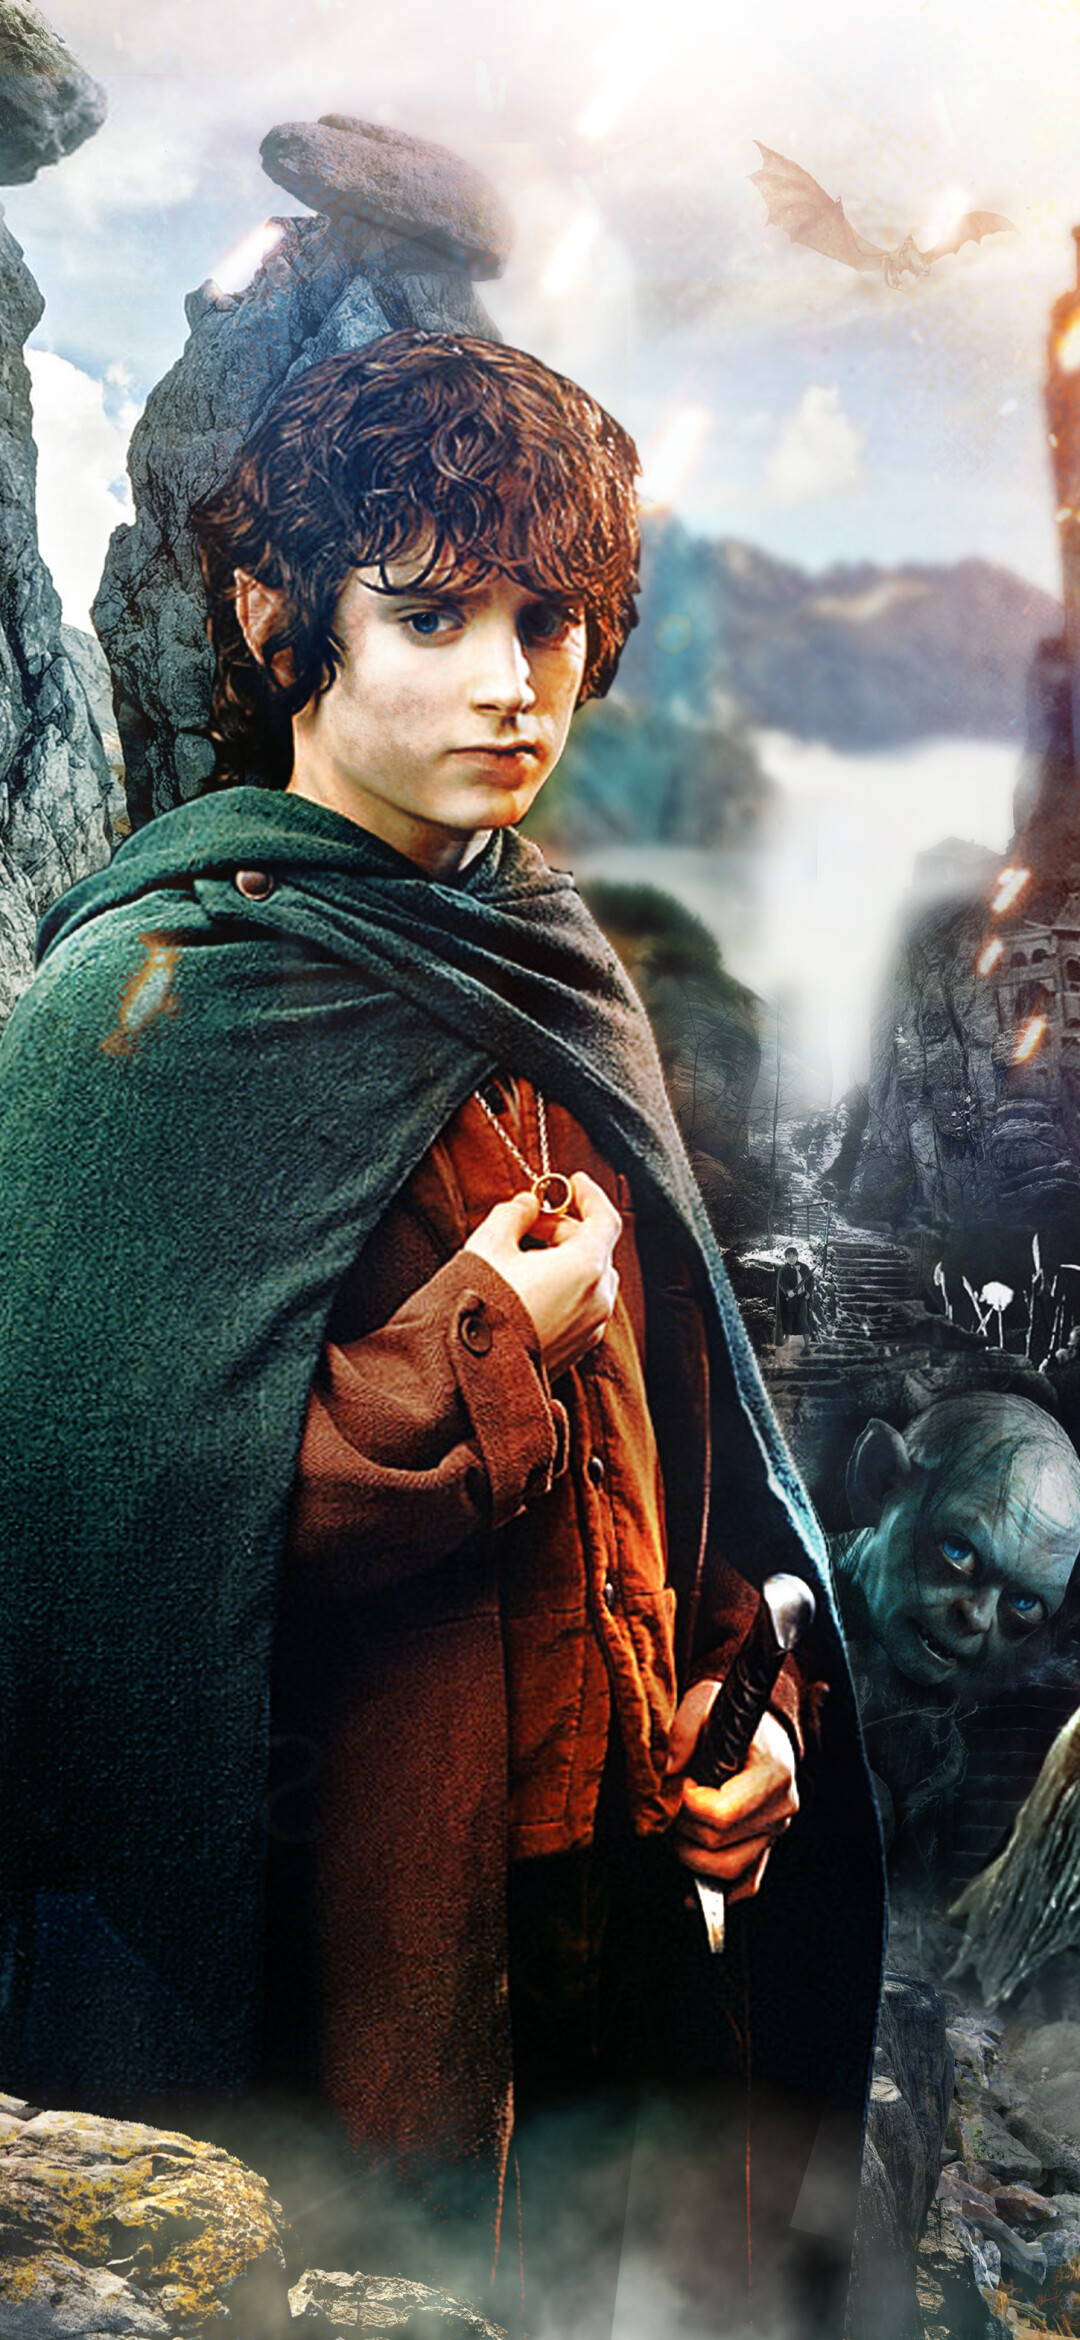 The Lord of the Rings: Frodo Baggins, A fictional character in J. R. R. Tolkien's writings. 1080x2340 HD Background.